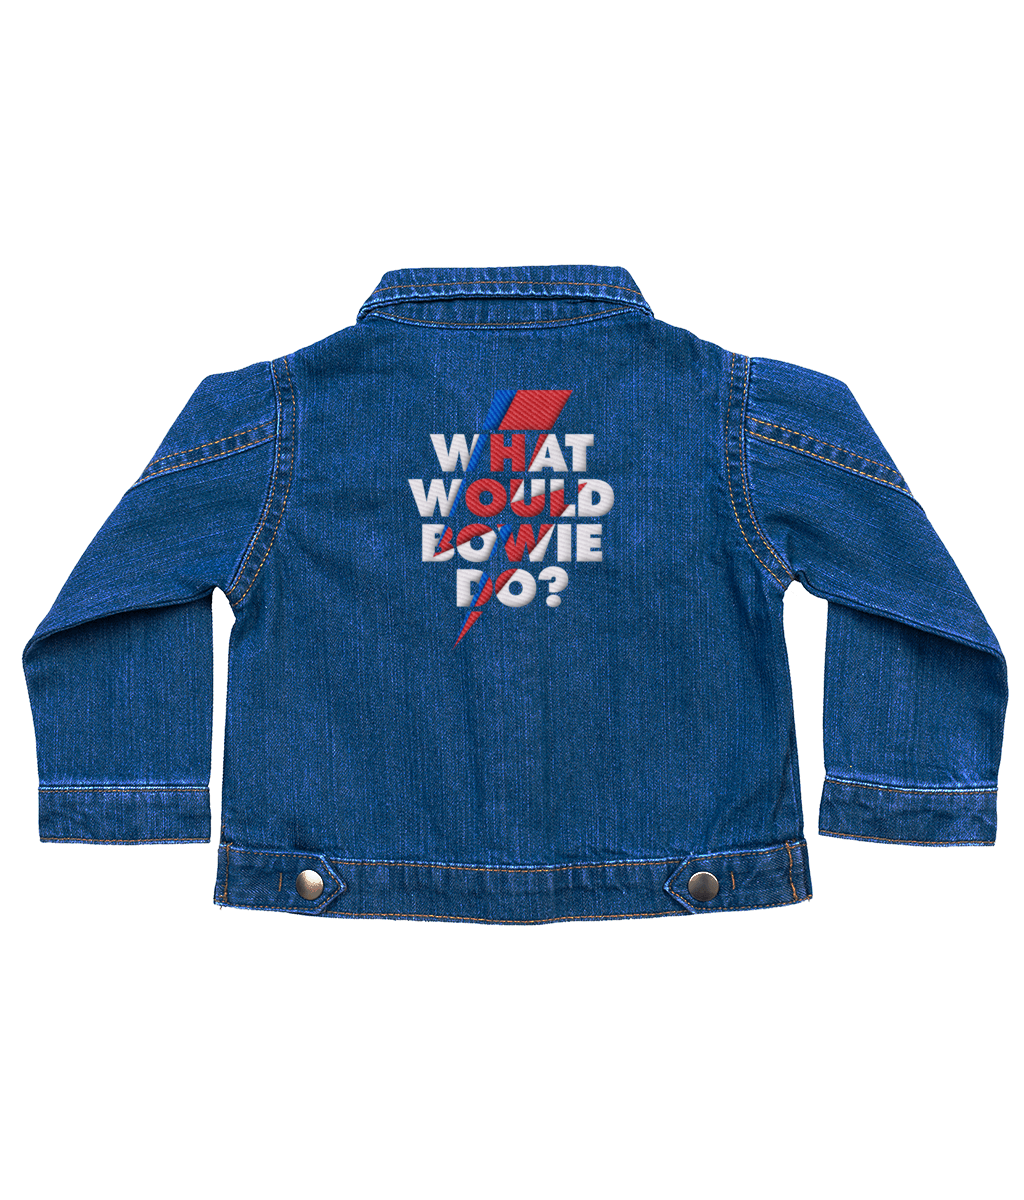 Organic Cotton Embroidered Denim Jacket, What Would Bowie Do?